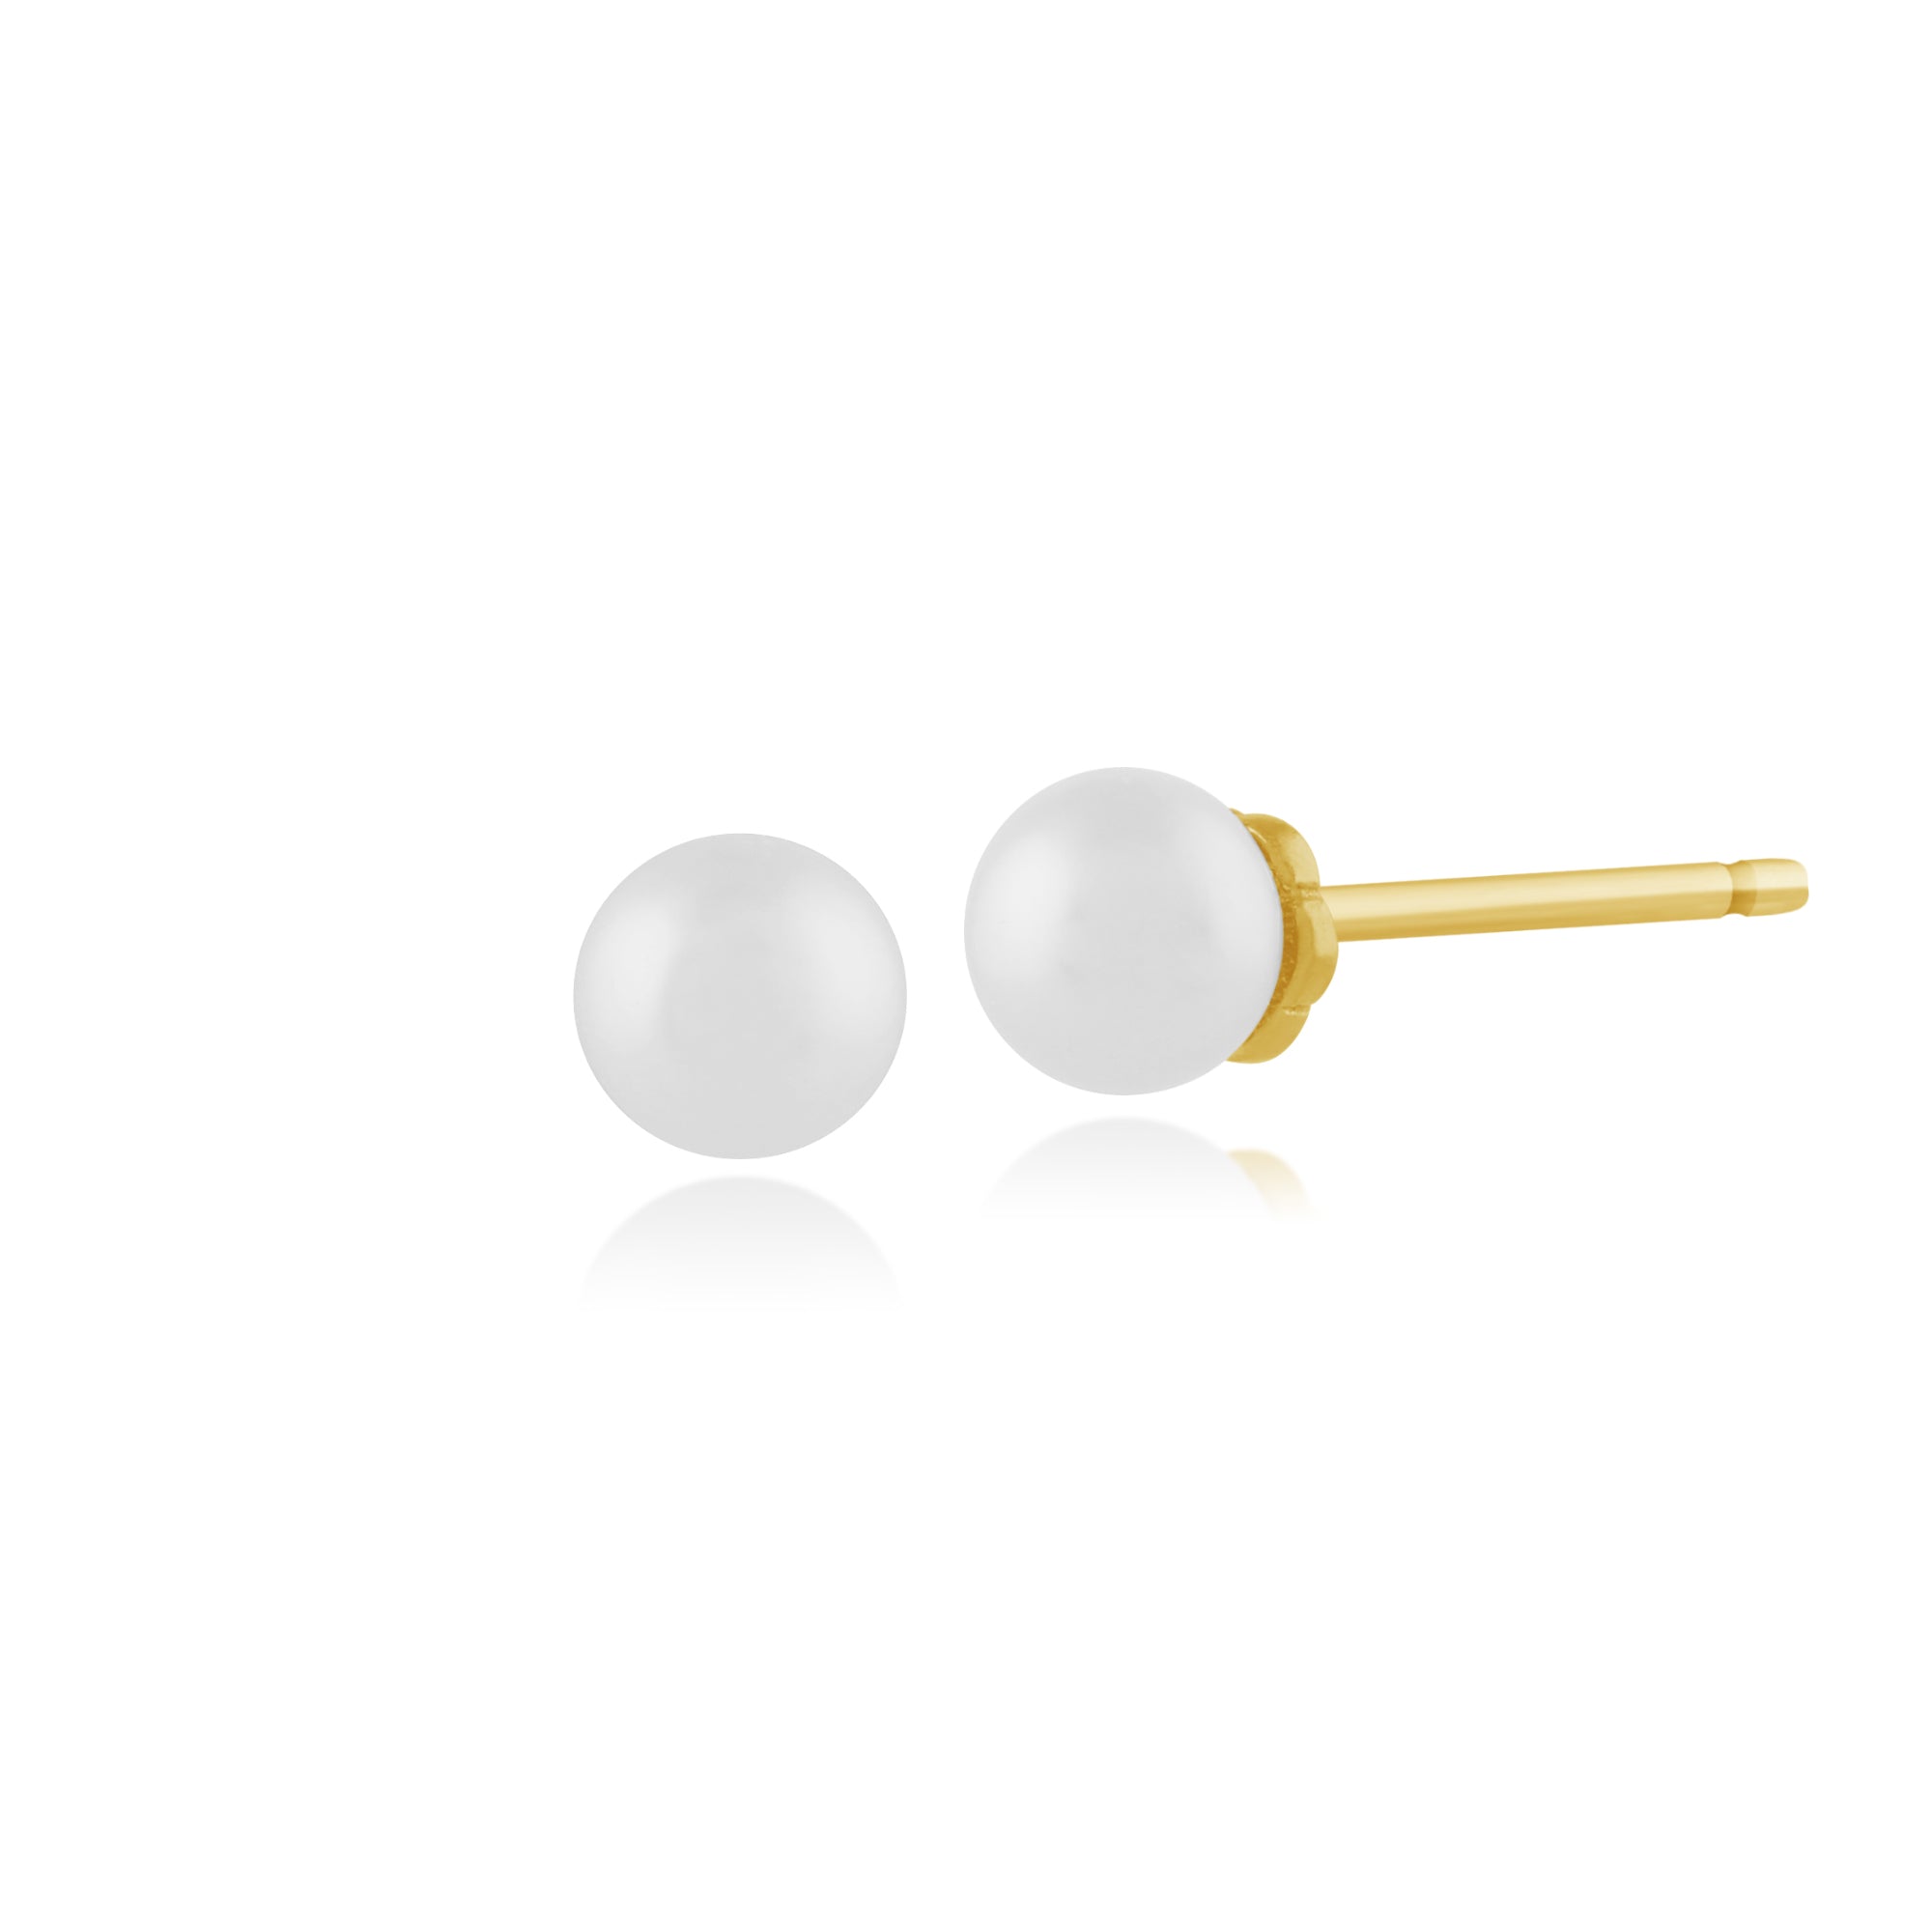 Gemondo 925 Gold Plated Sterling Silver 0.86ct Freshwater Pearl Stud Earrings Image